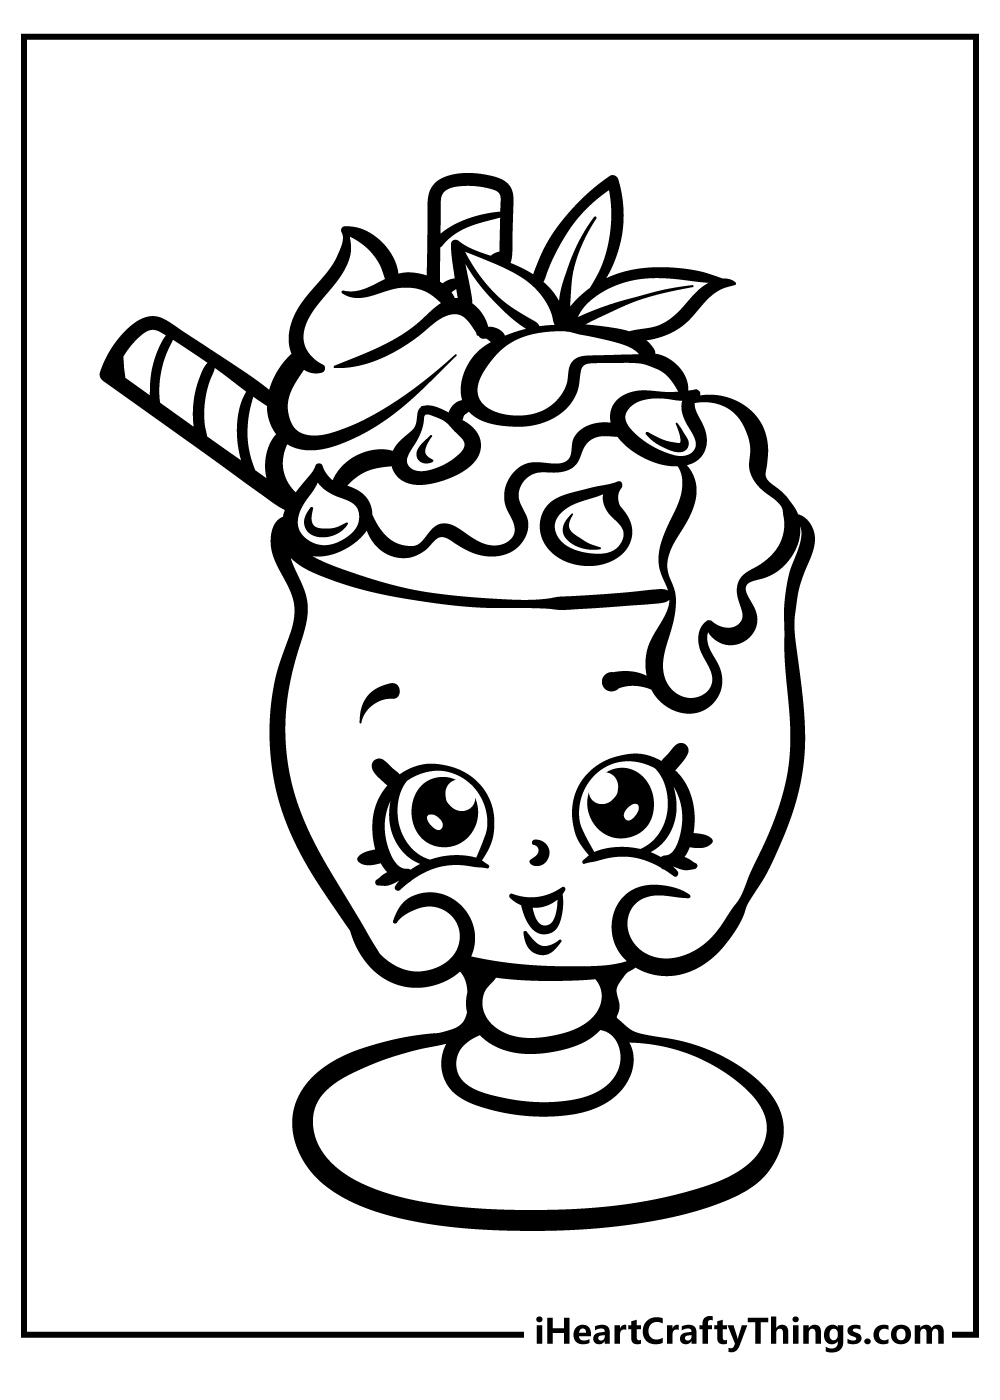 Shopkins Coloring Pages Updated 21